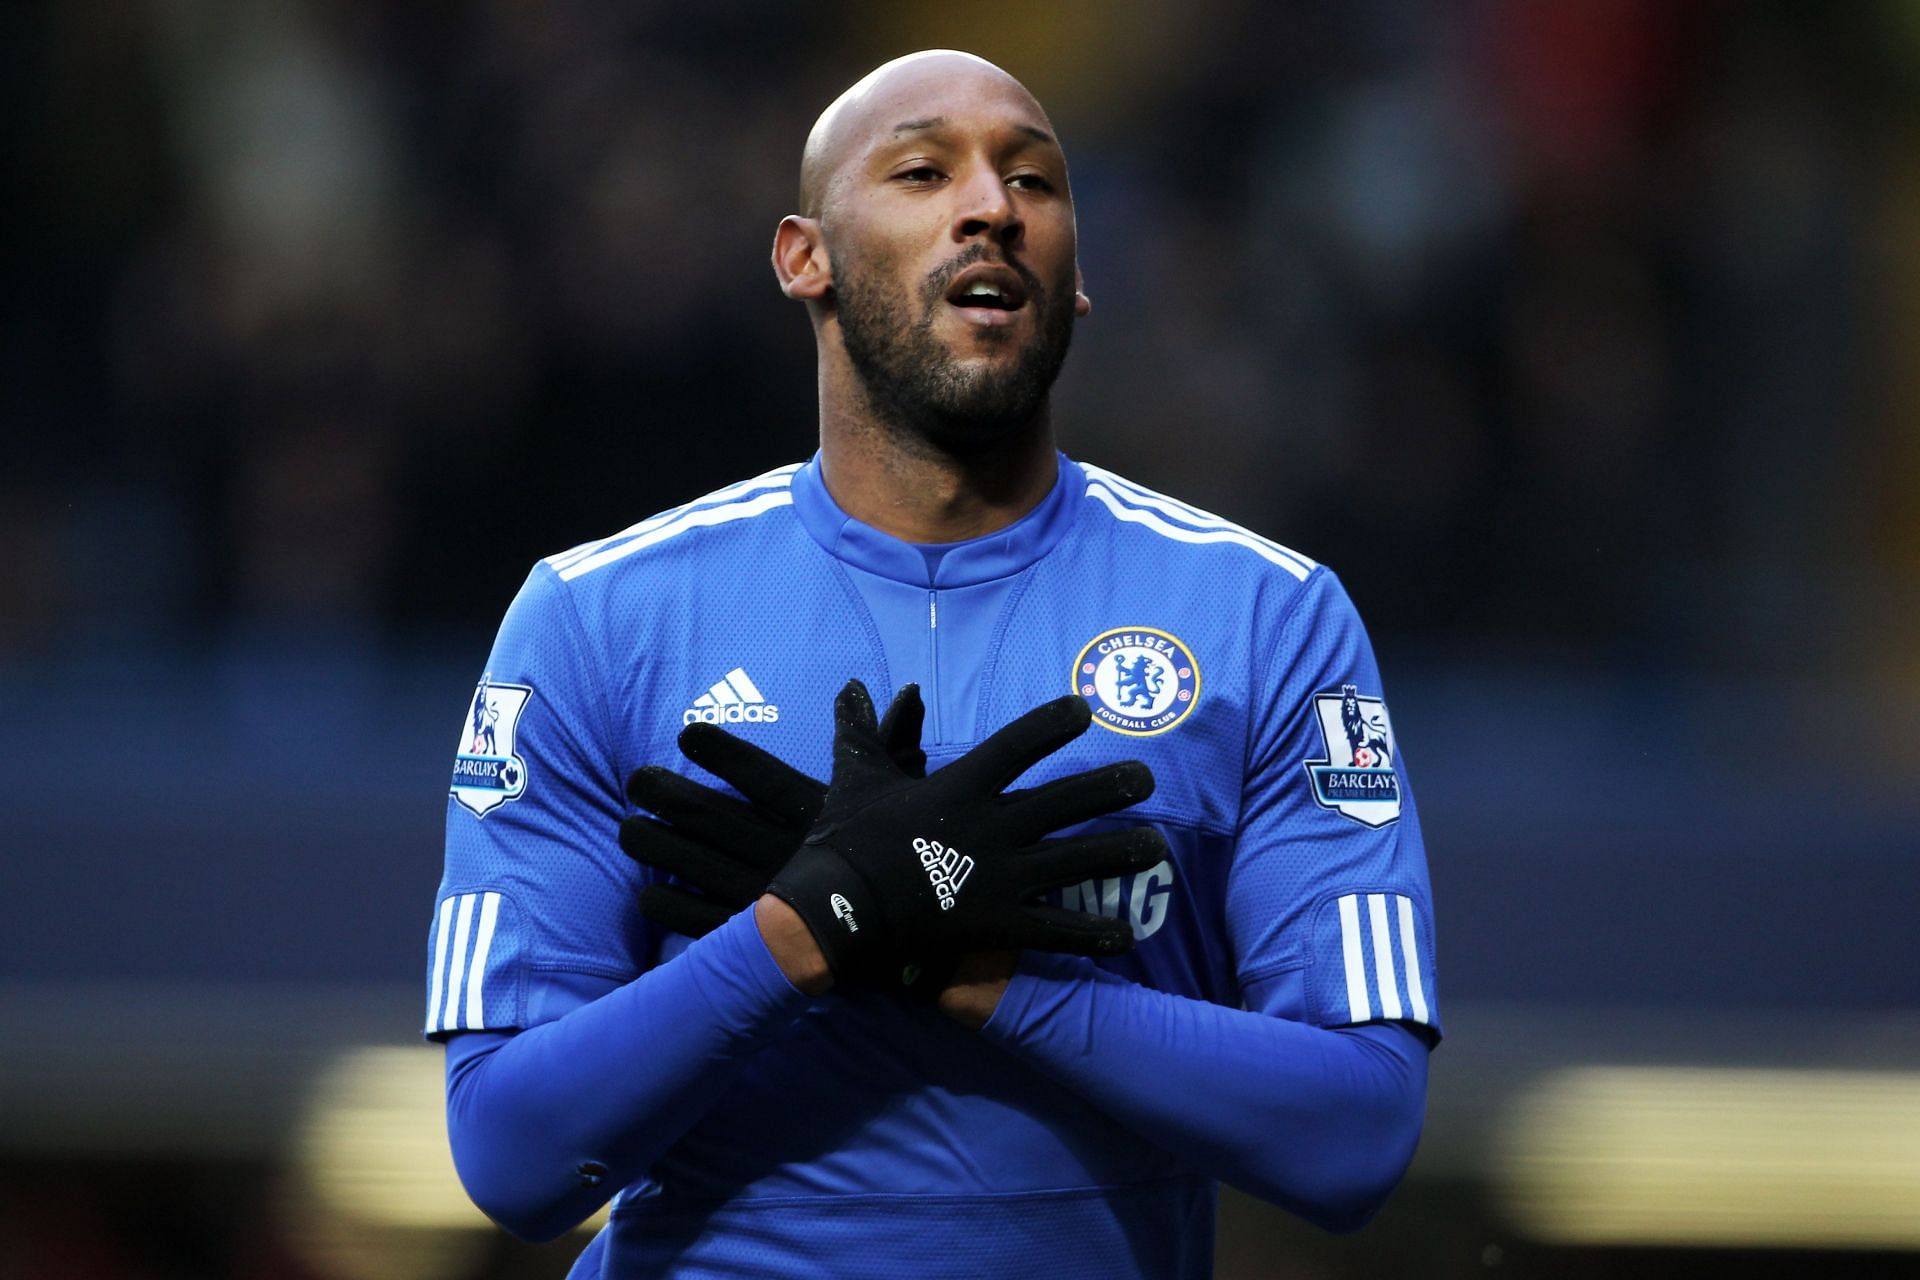 No one has scored more goals against his former club in the Premier League than Nicolas Anelka